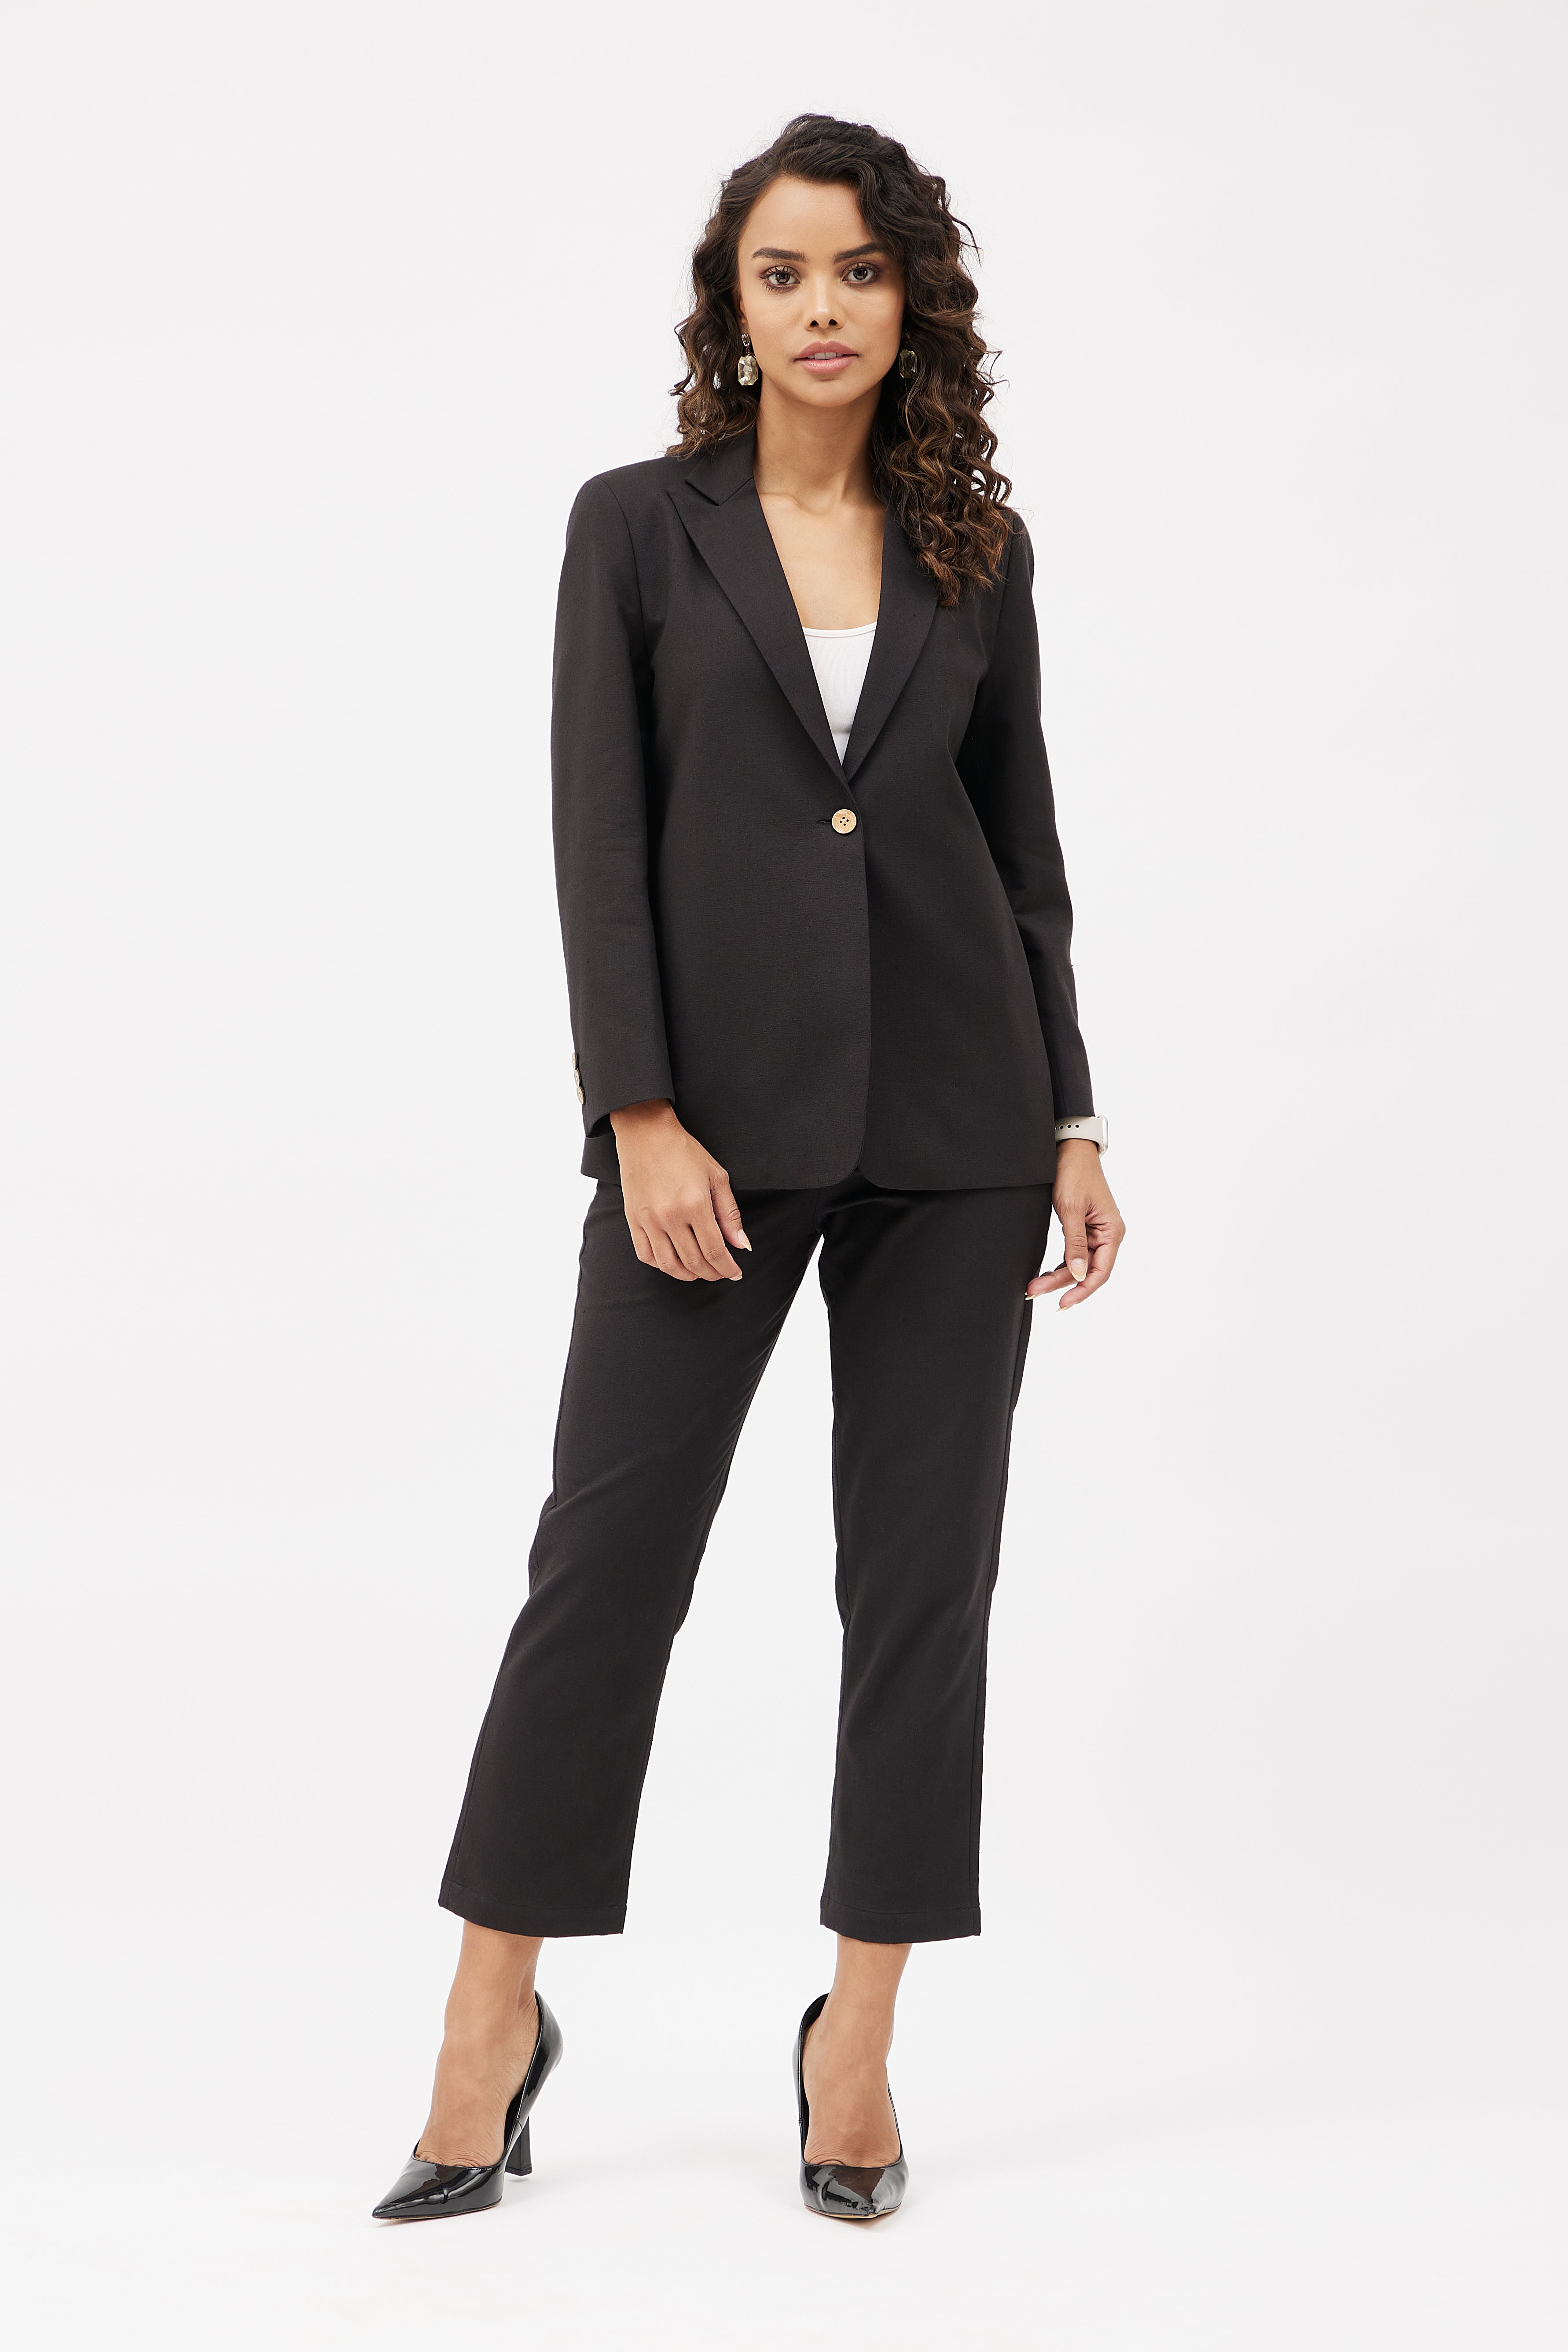 Buy Black Womens Pants Suit Set With Blazer Black Classic Online in India   Etsy